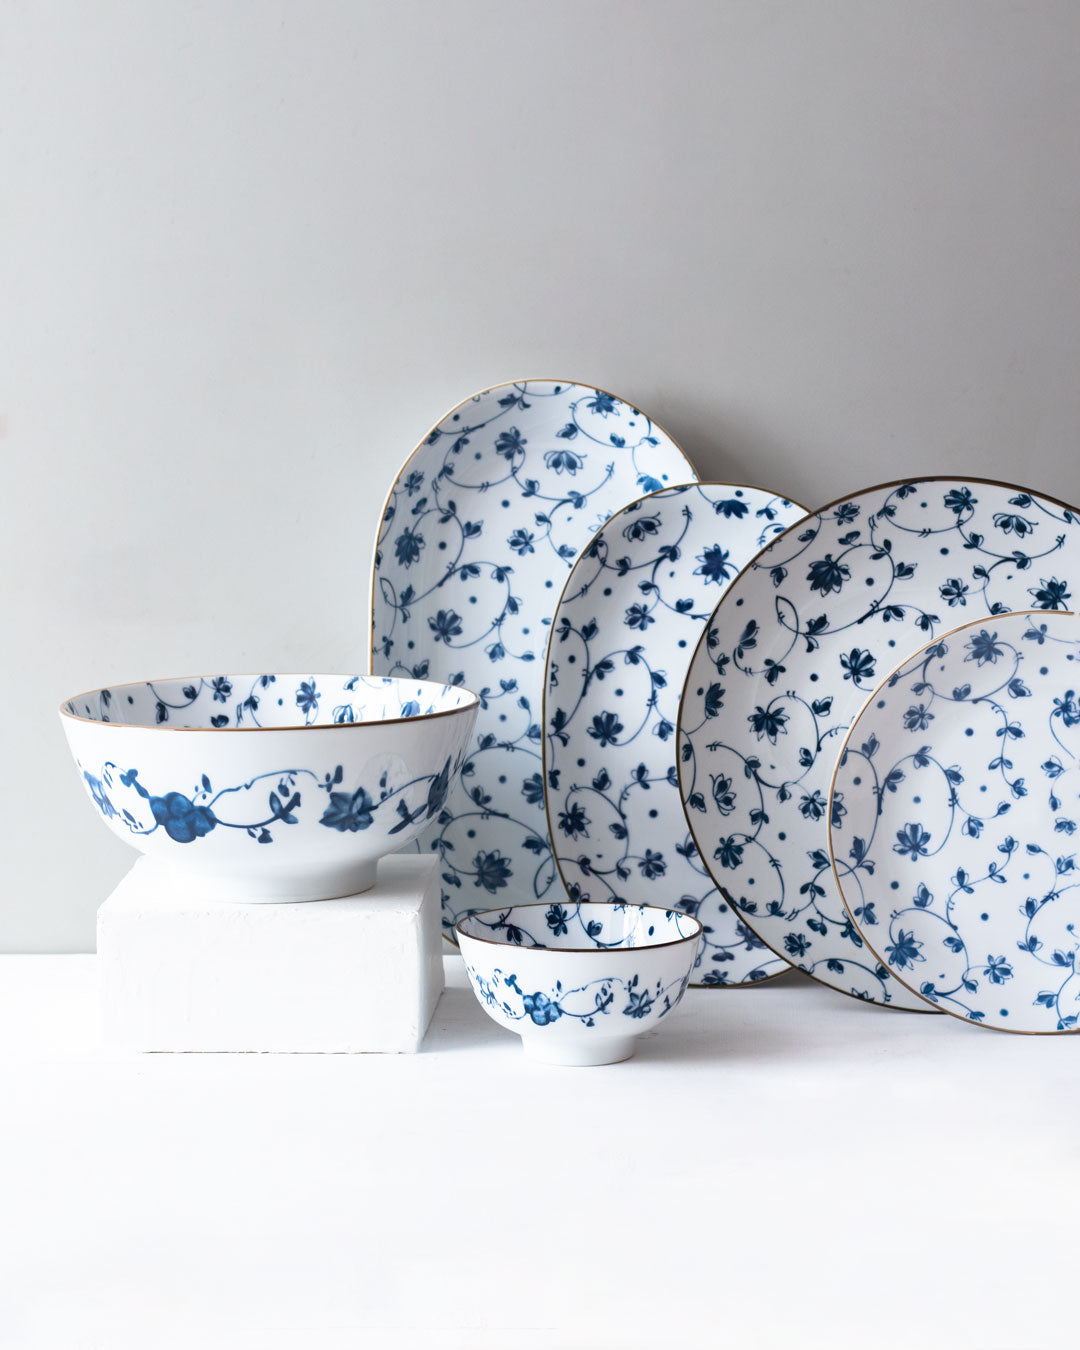 Orchid Blue & White Platter- Small